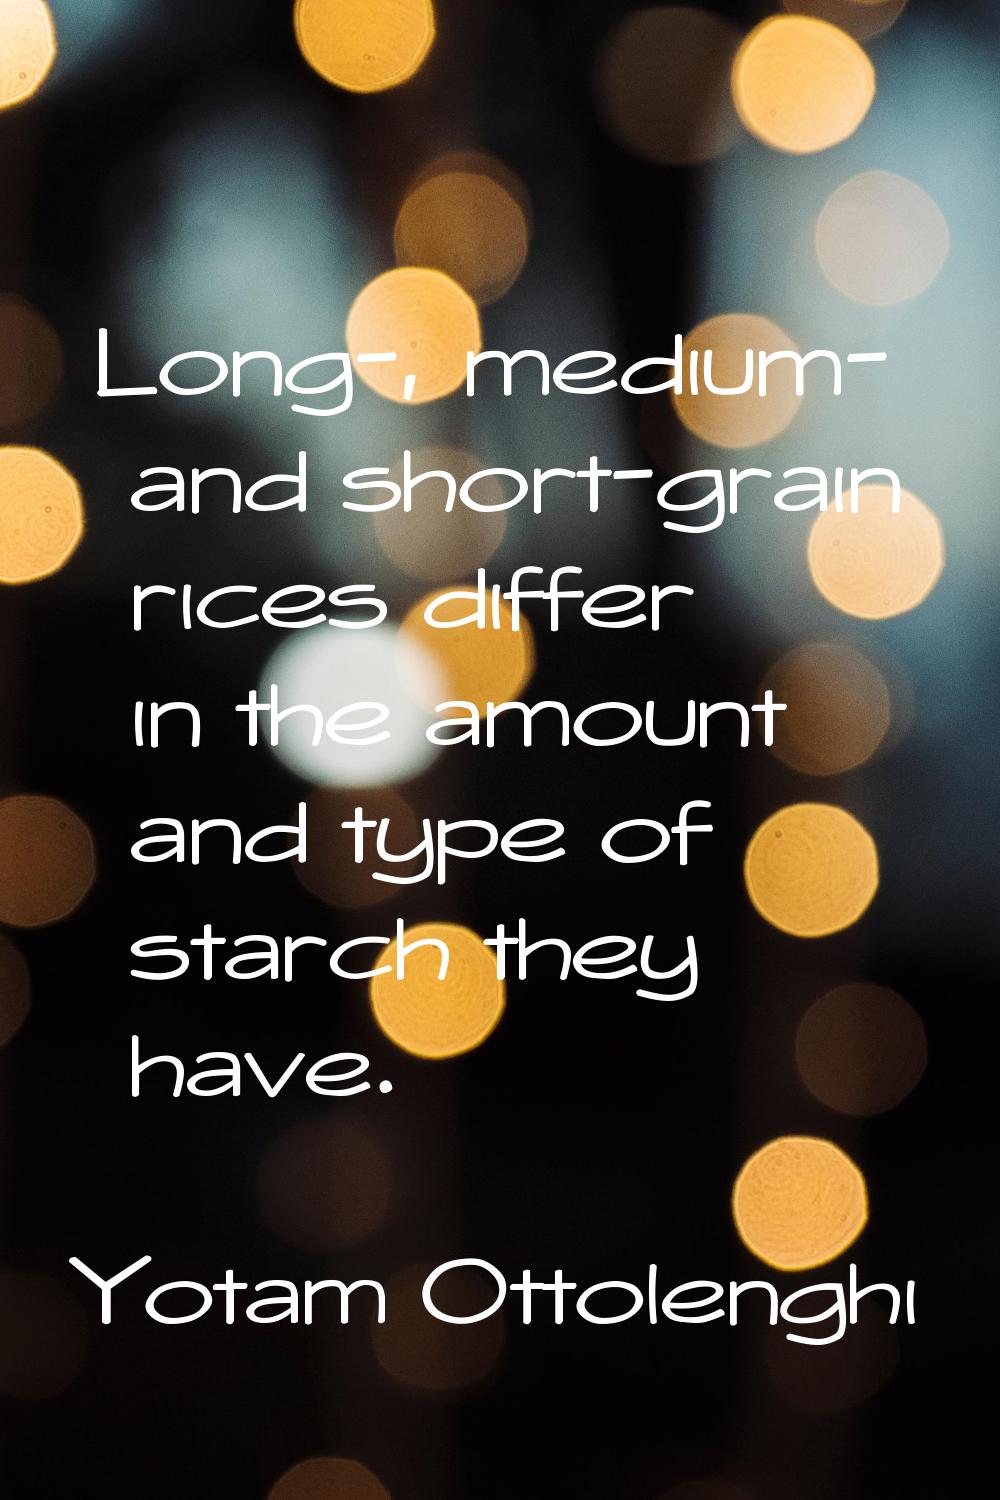 Long-, medium- and short-grain rices differ in the amount and type of starch they have.